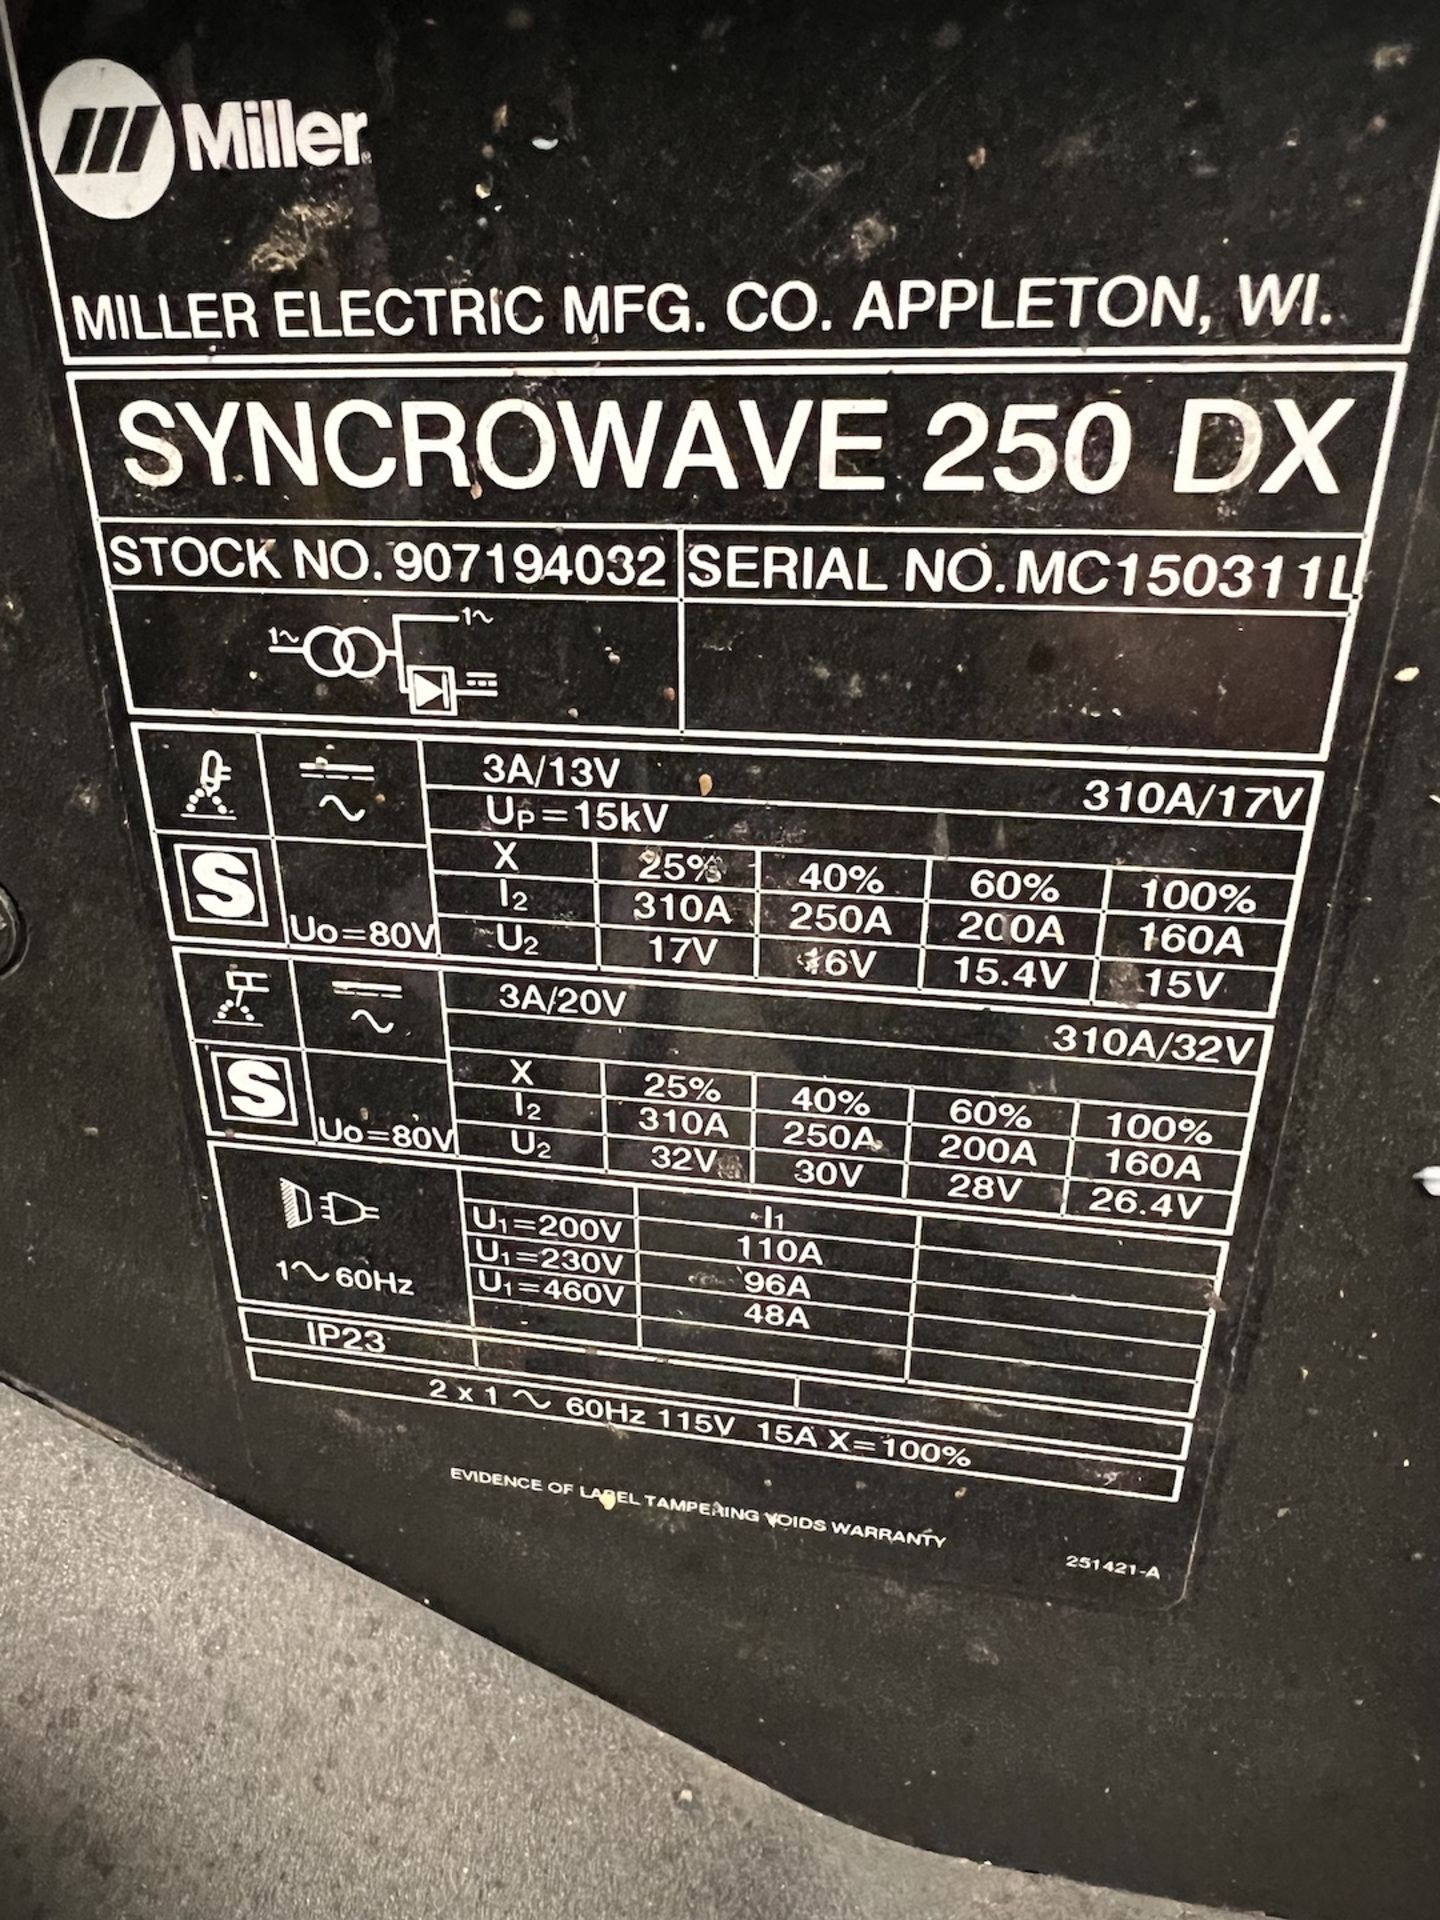 MILLER ELECTRIC SYNCROWAVE 250 DX WELDER, S/N MC150311L, FINGER AND PEDAL TORCH - Image 2 of 6